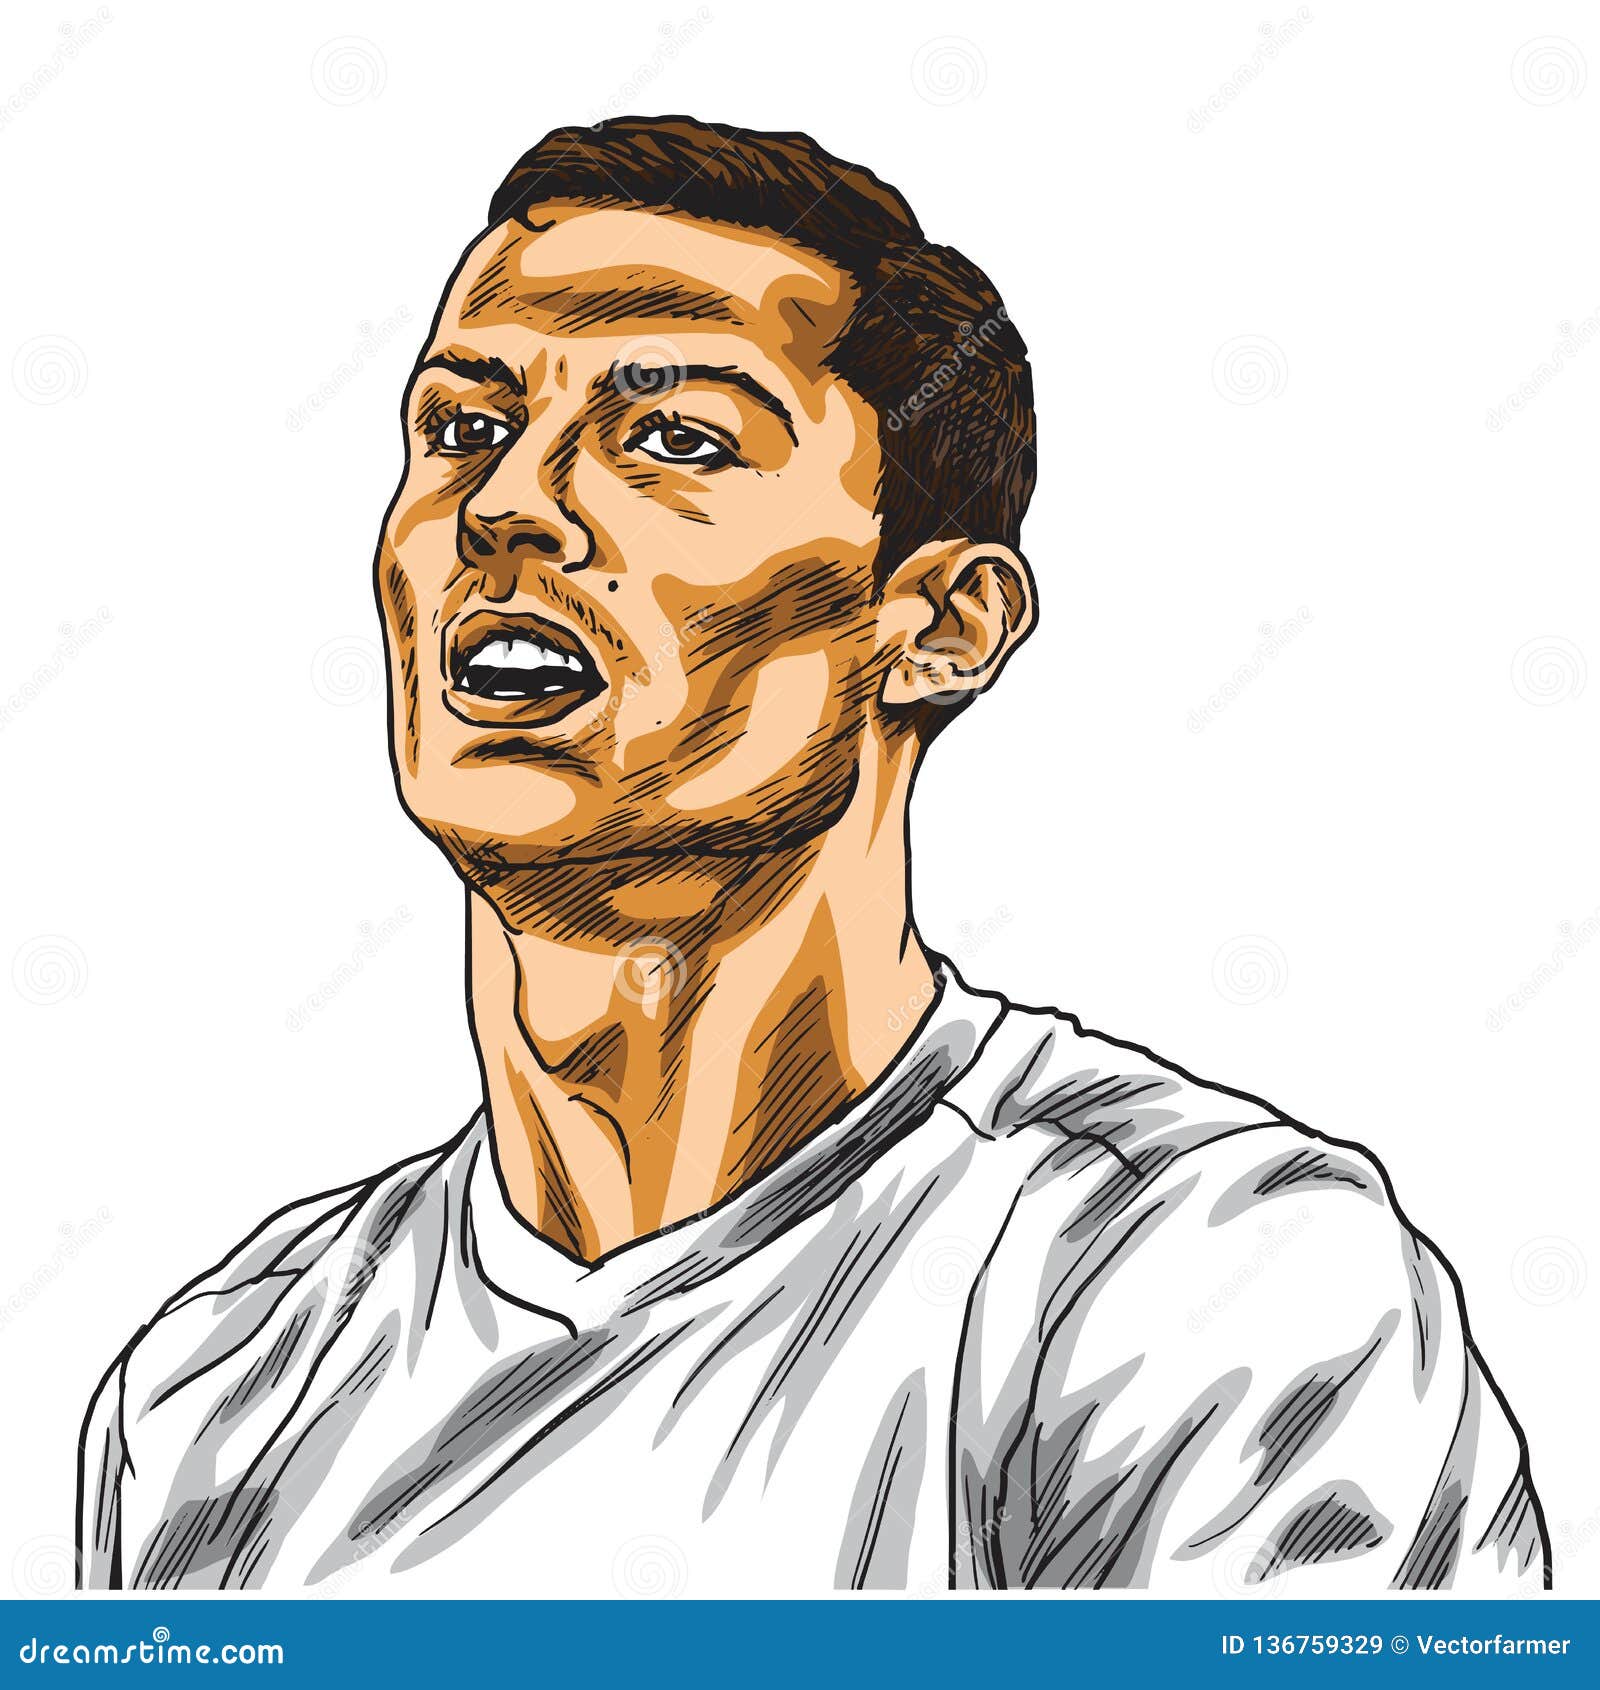 How to draw Cristiano Ronaldo Step by Step // full sketch outline tutorial  for beginners - YouTube